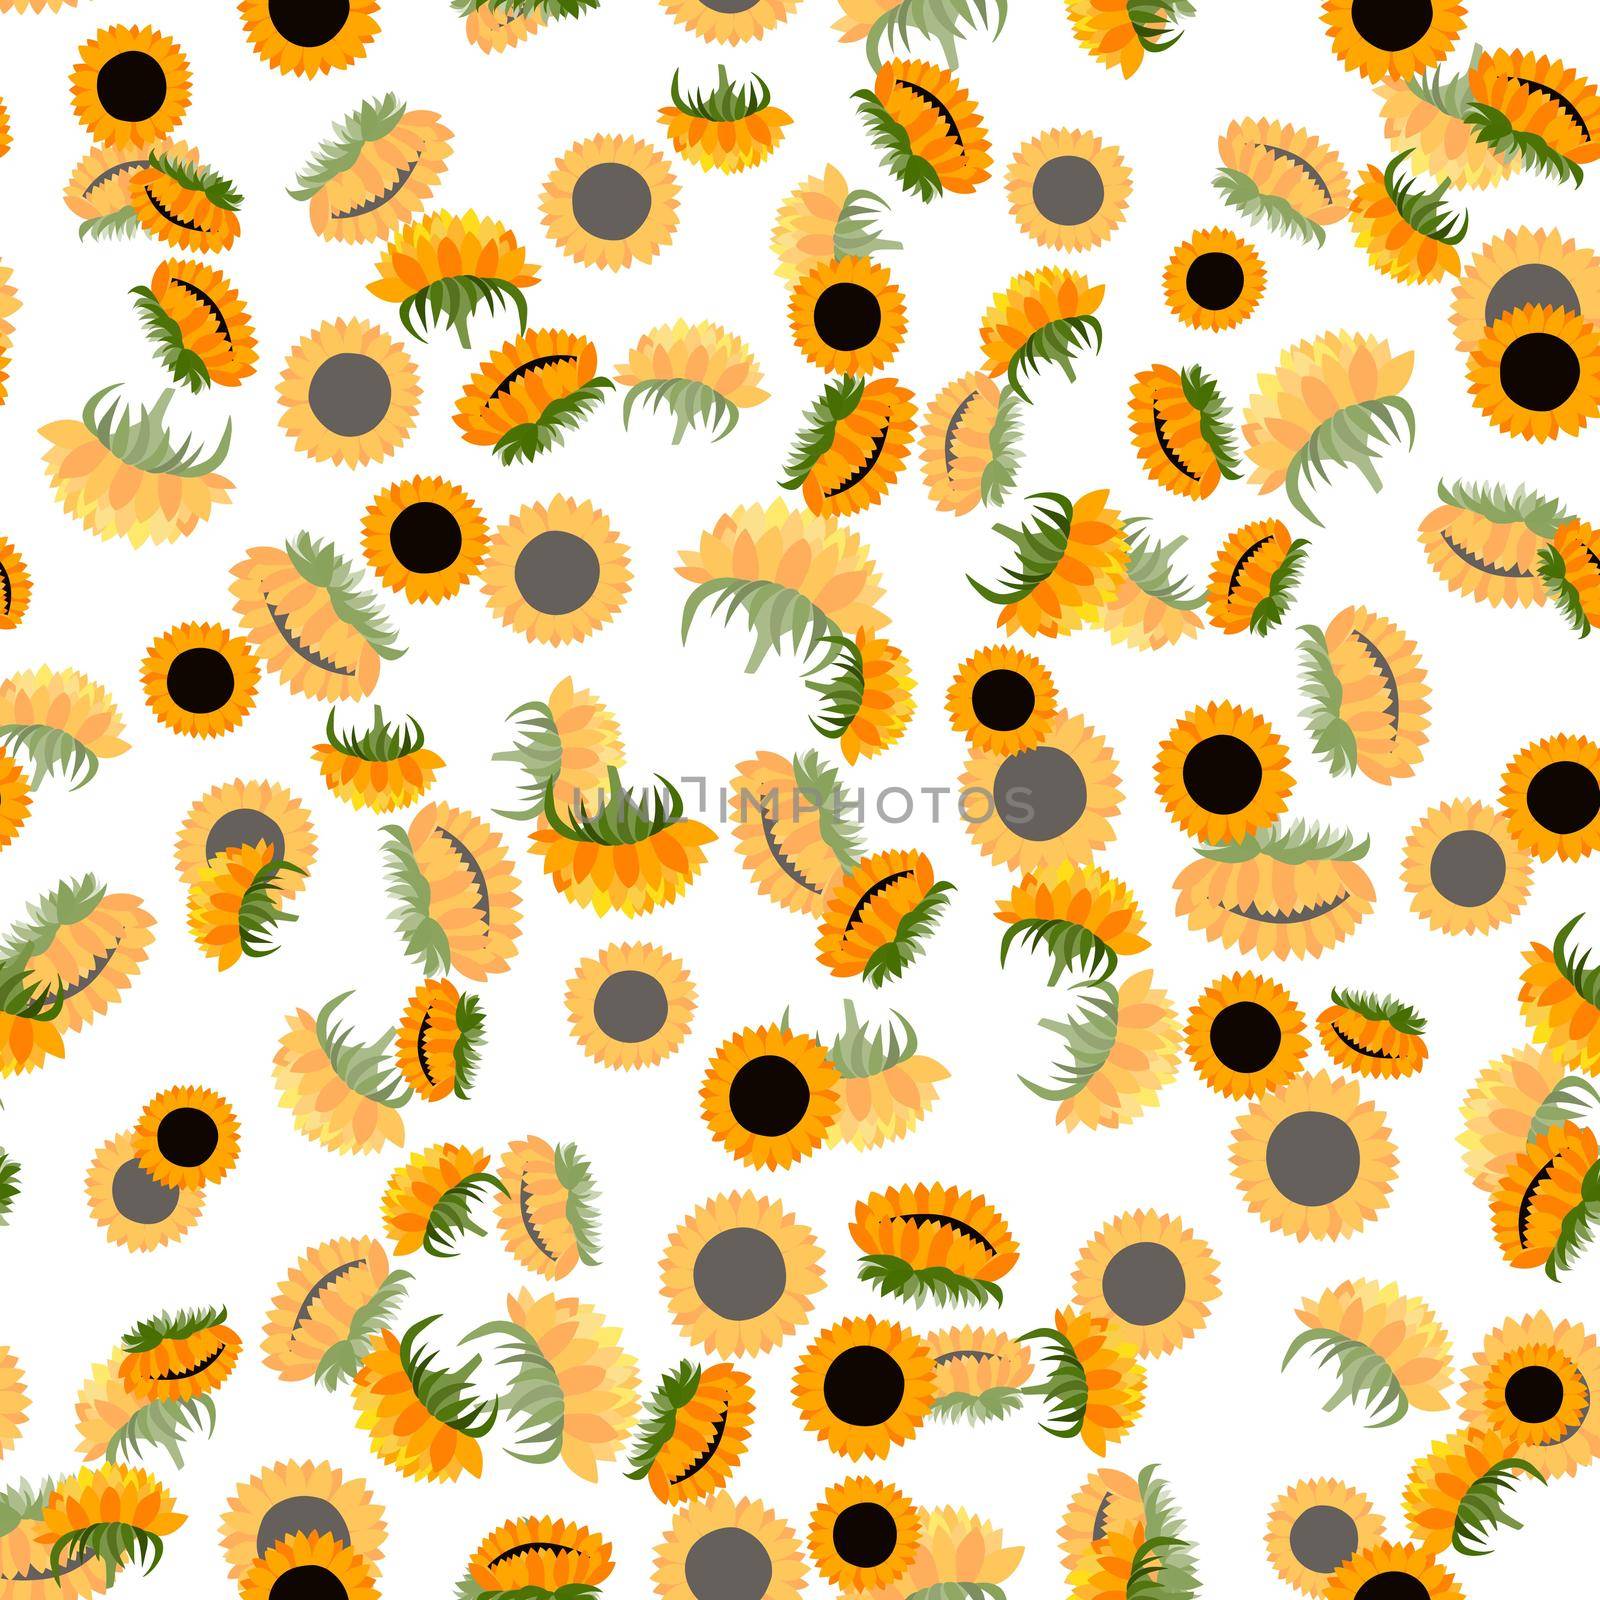 Summer colorful seamless pattern with orange sunflowers on white background. Cartoon style. Design for fabric, textile, posters, card, paper. Flowers with leaves. Vector illustration